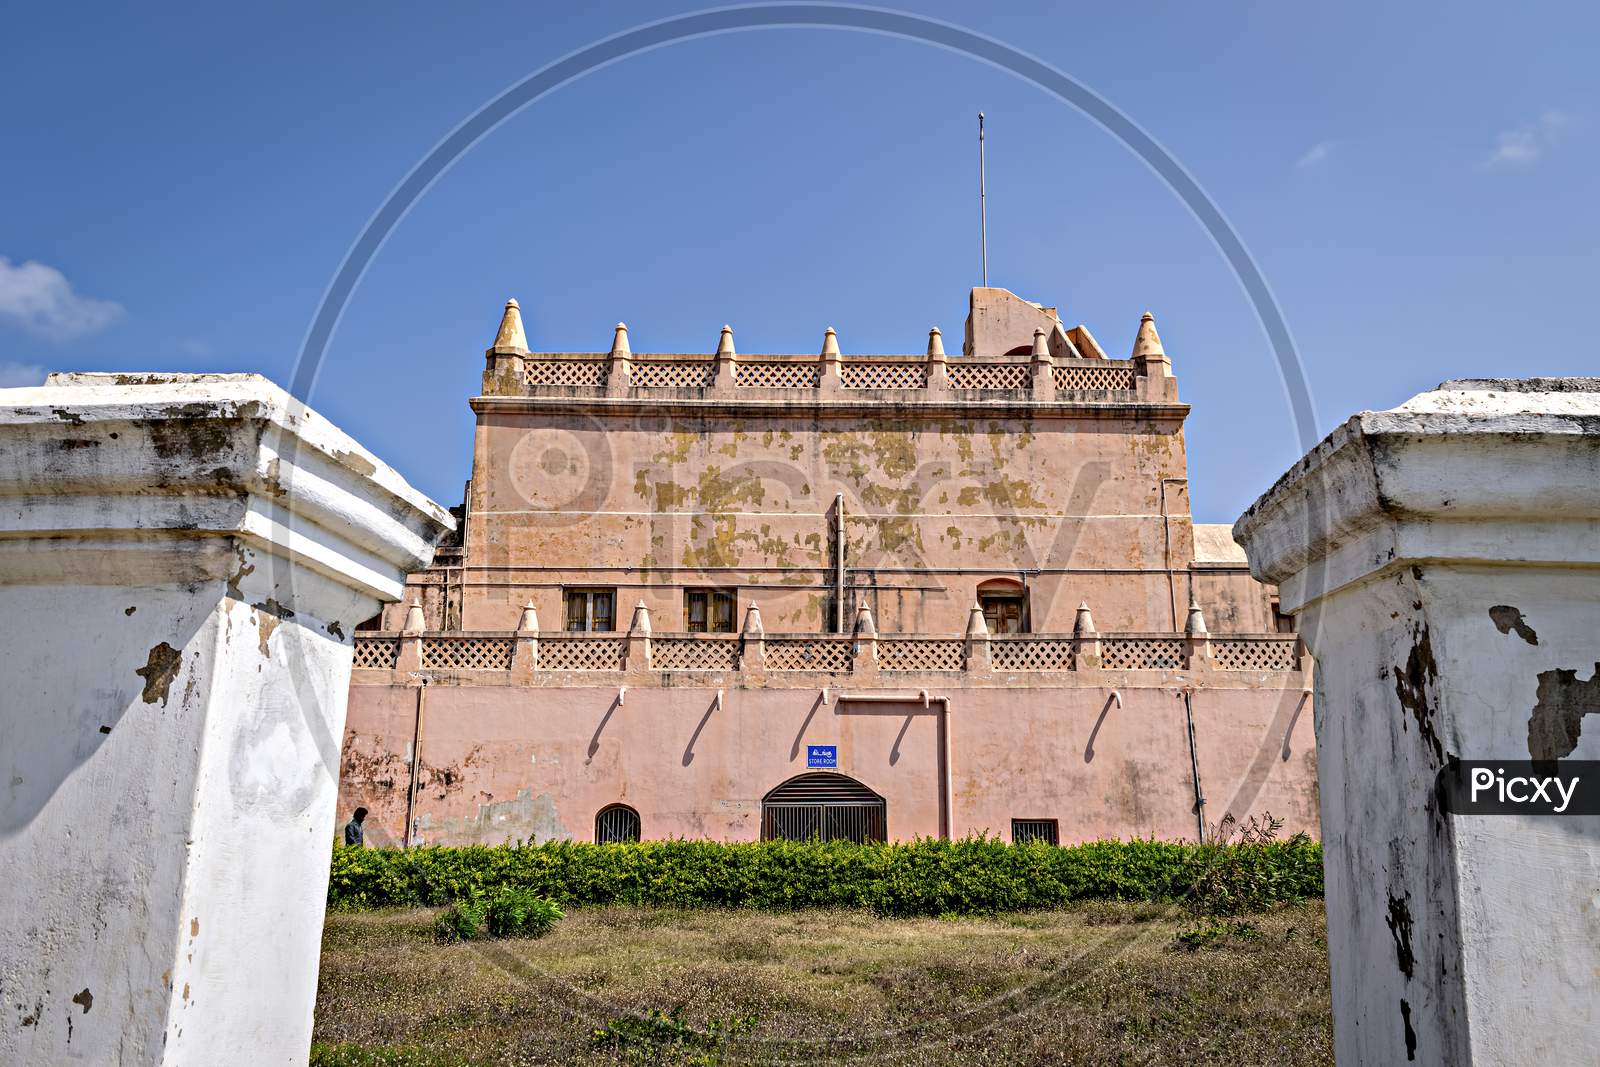 Fort Dansborg Is The Second Largest Danish Fort In The World At Tranquebar, India